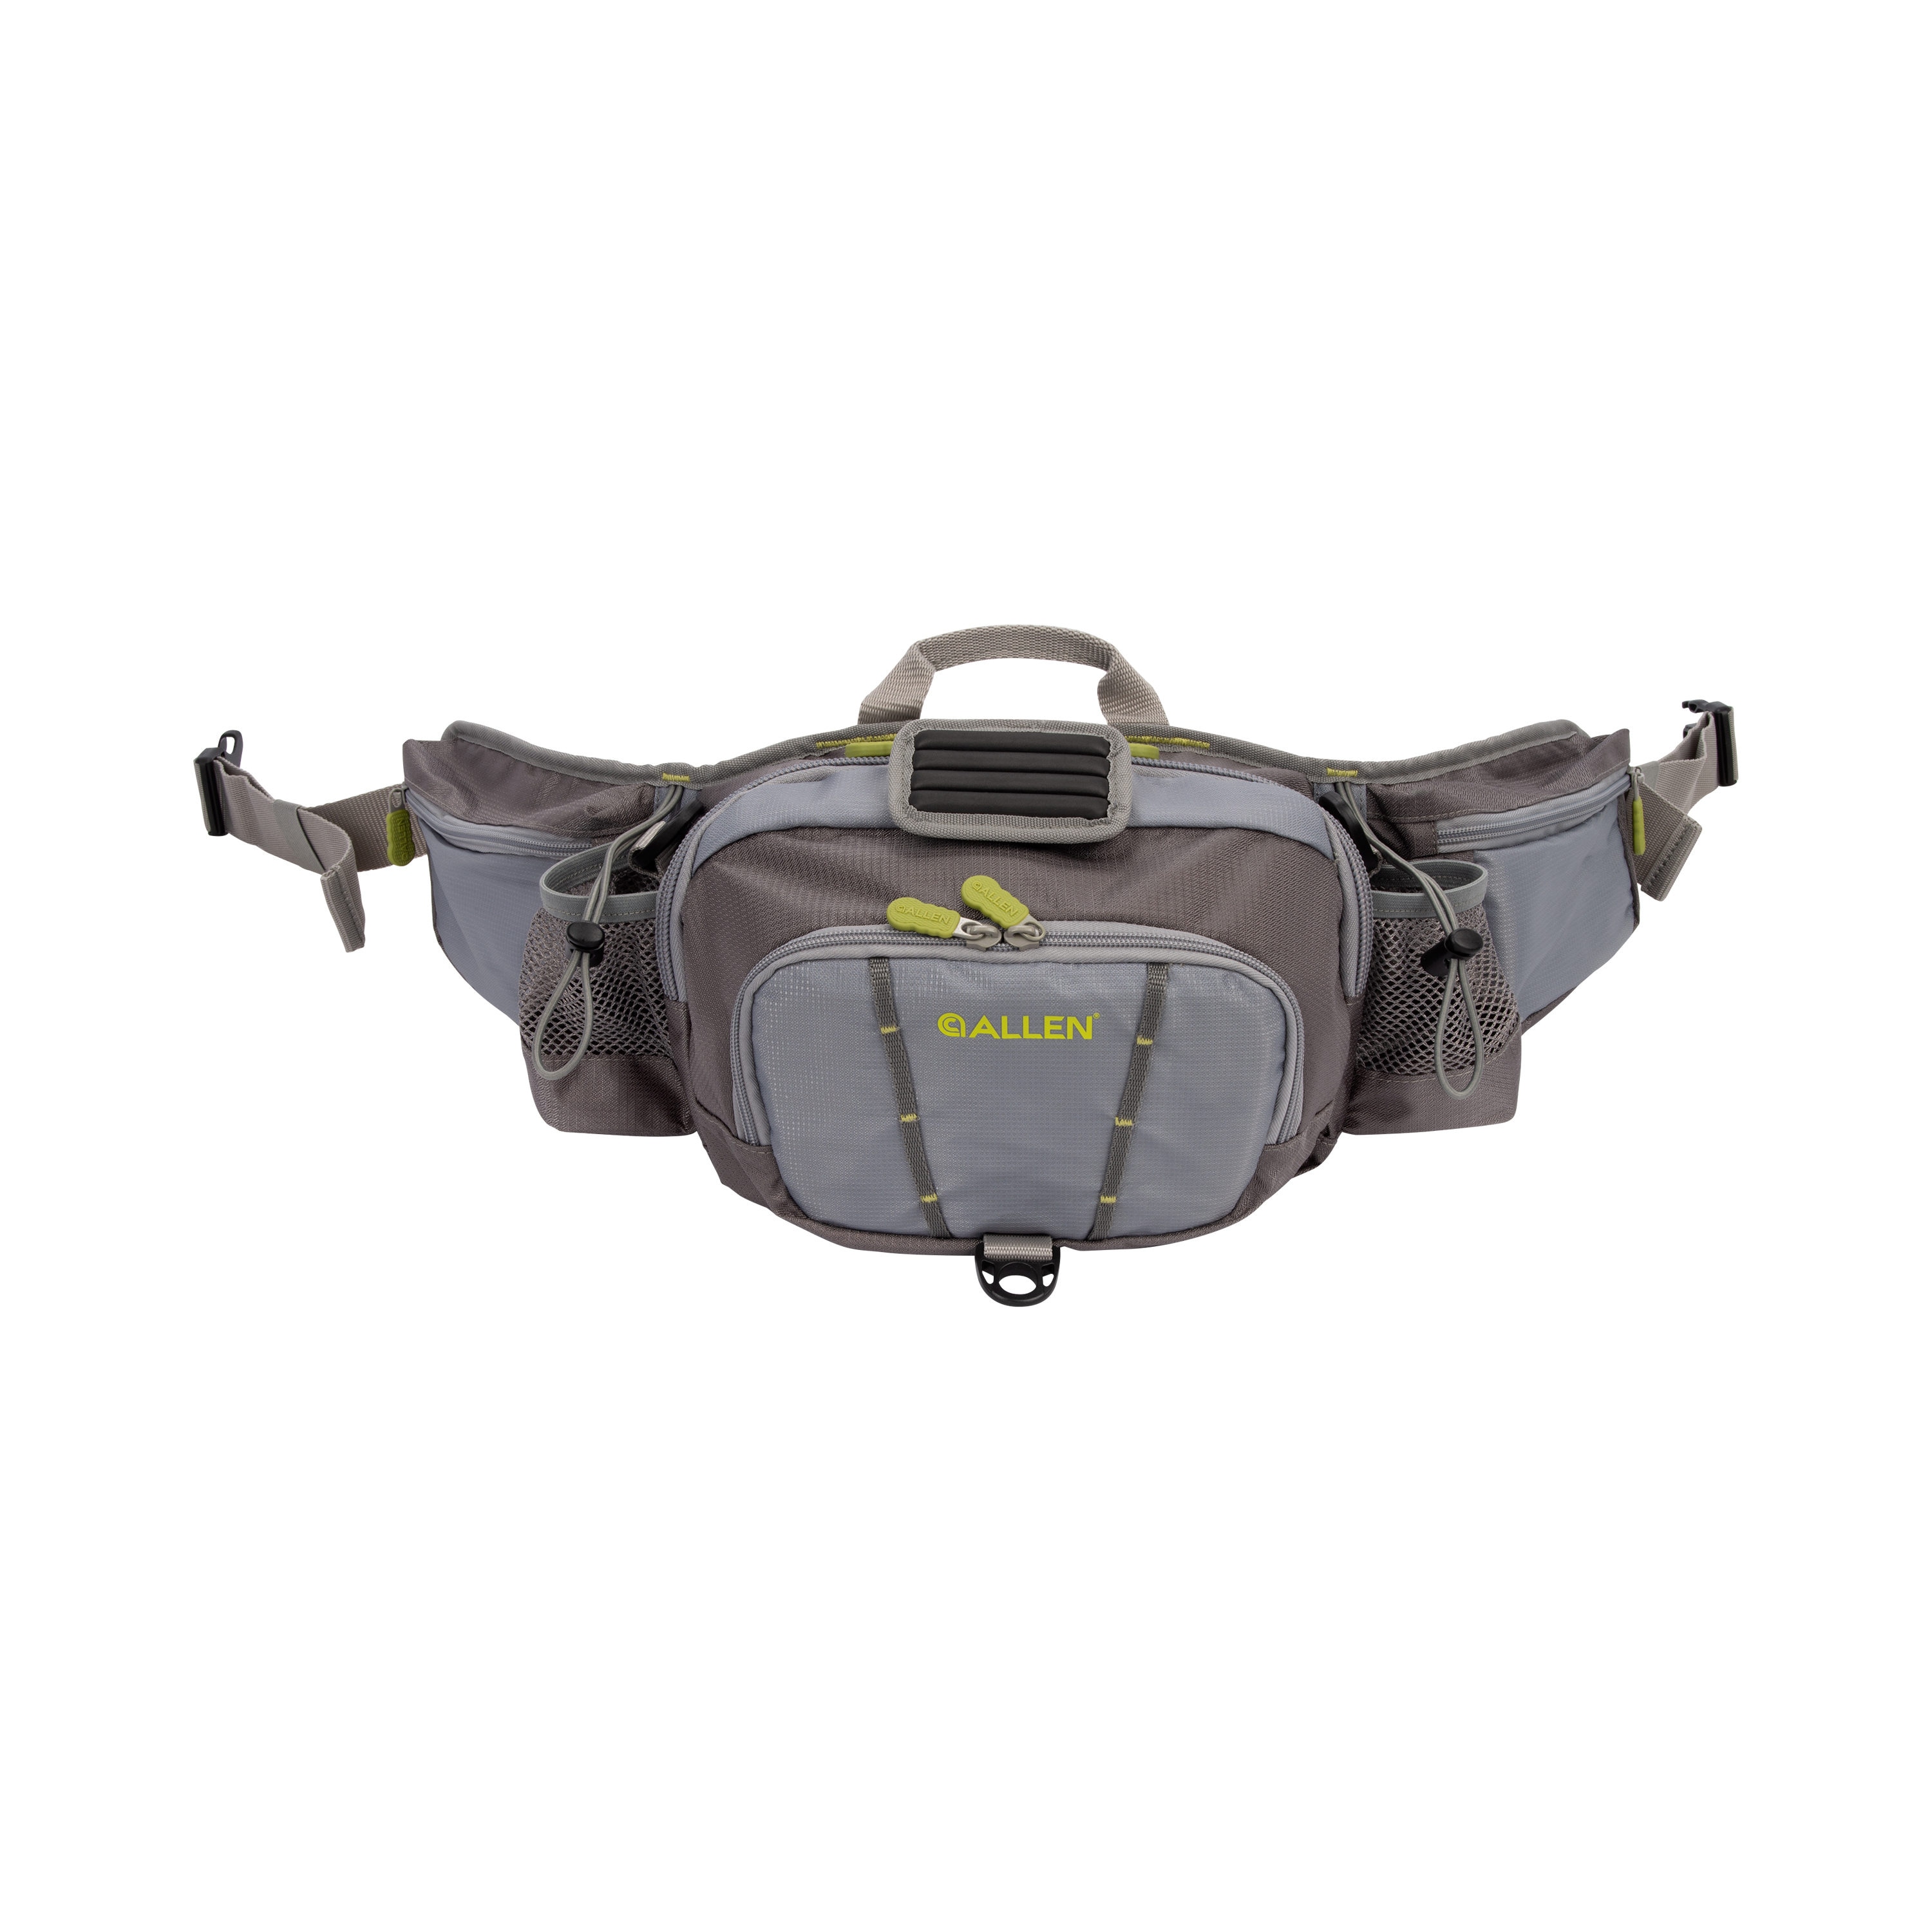 Allen Company Eagle River Gray Fishing Bag - Fishing Lumbar Pack with  Workstation, Fits 6 Fly Boxes, Adjustable Shoulder Strap and Waist Strap in  the Fishing Gear & Apparel department at